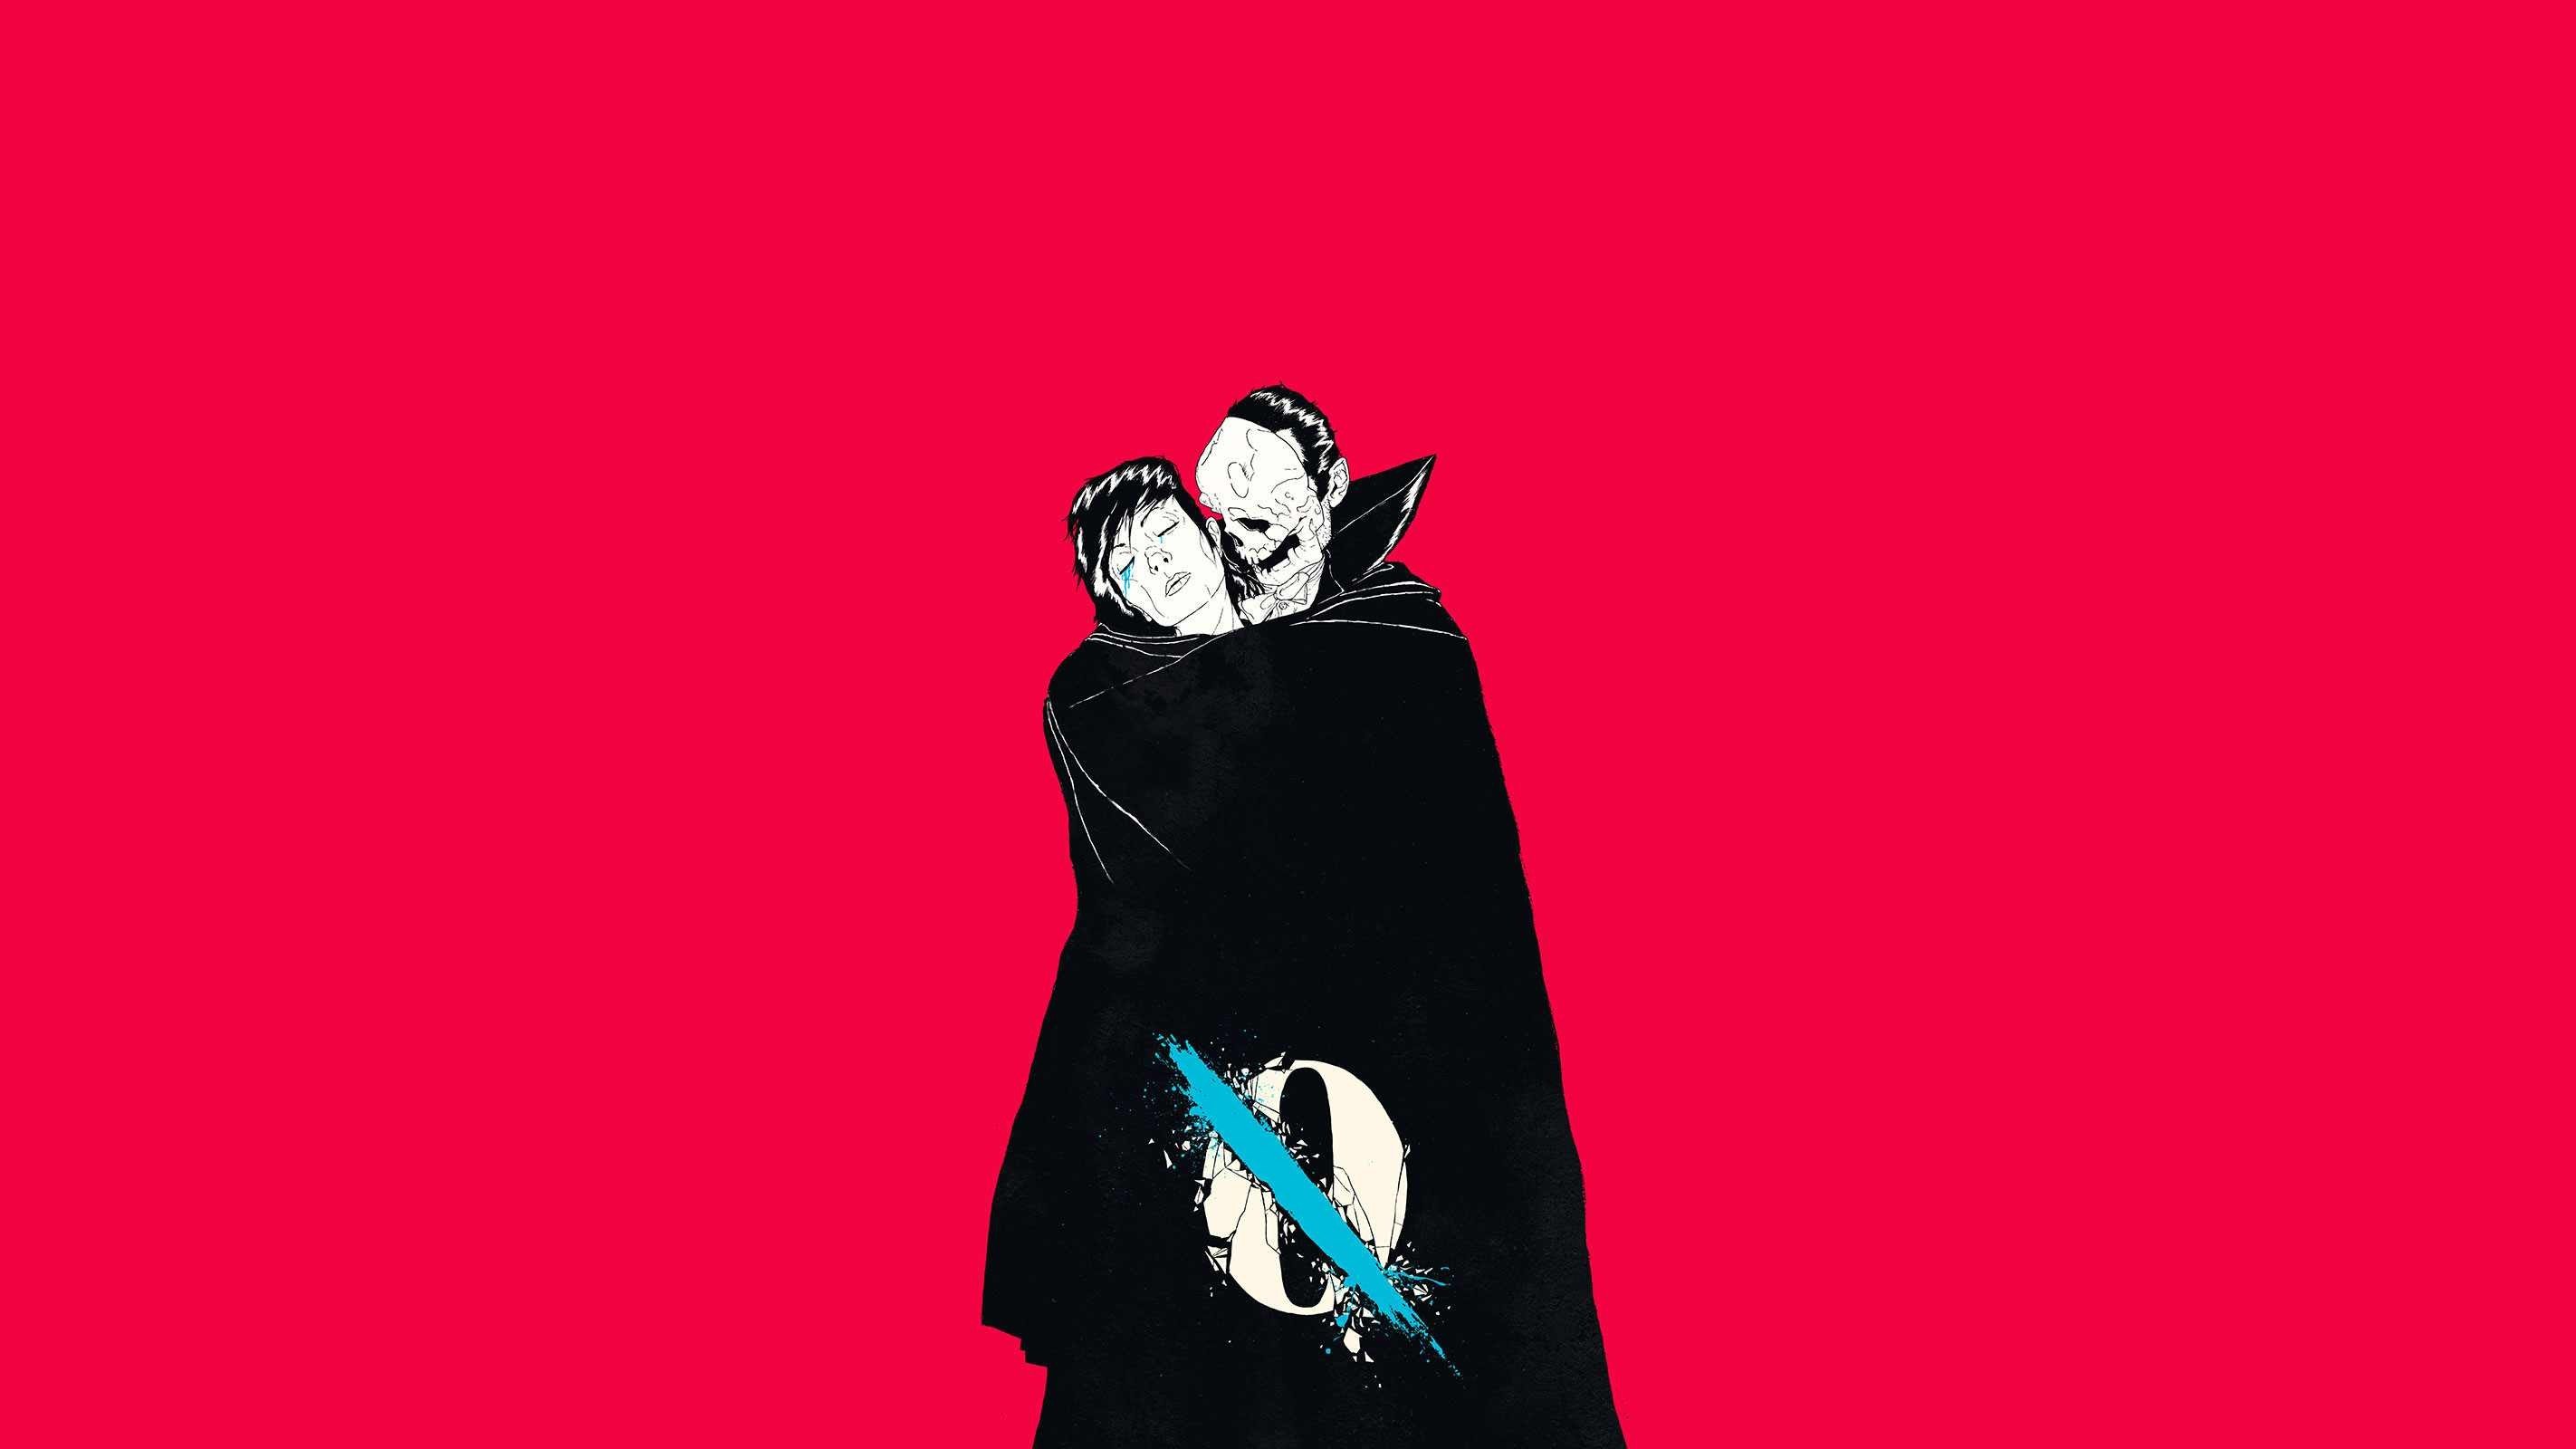 Queens of the Stone Age, Album covers, Pink Wallpaper